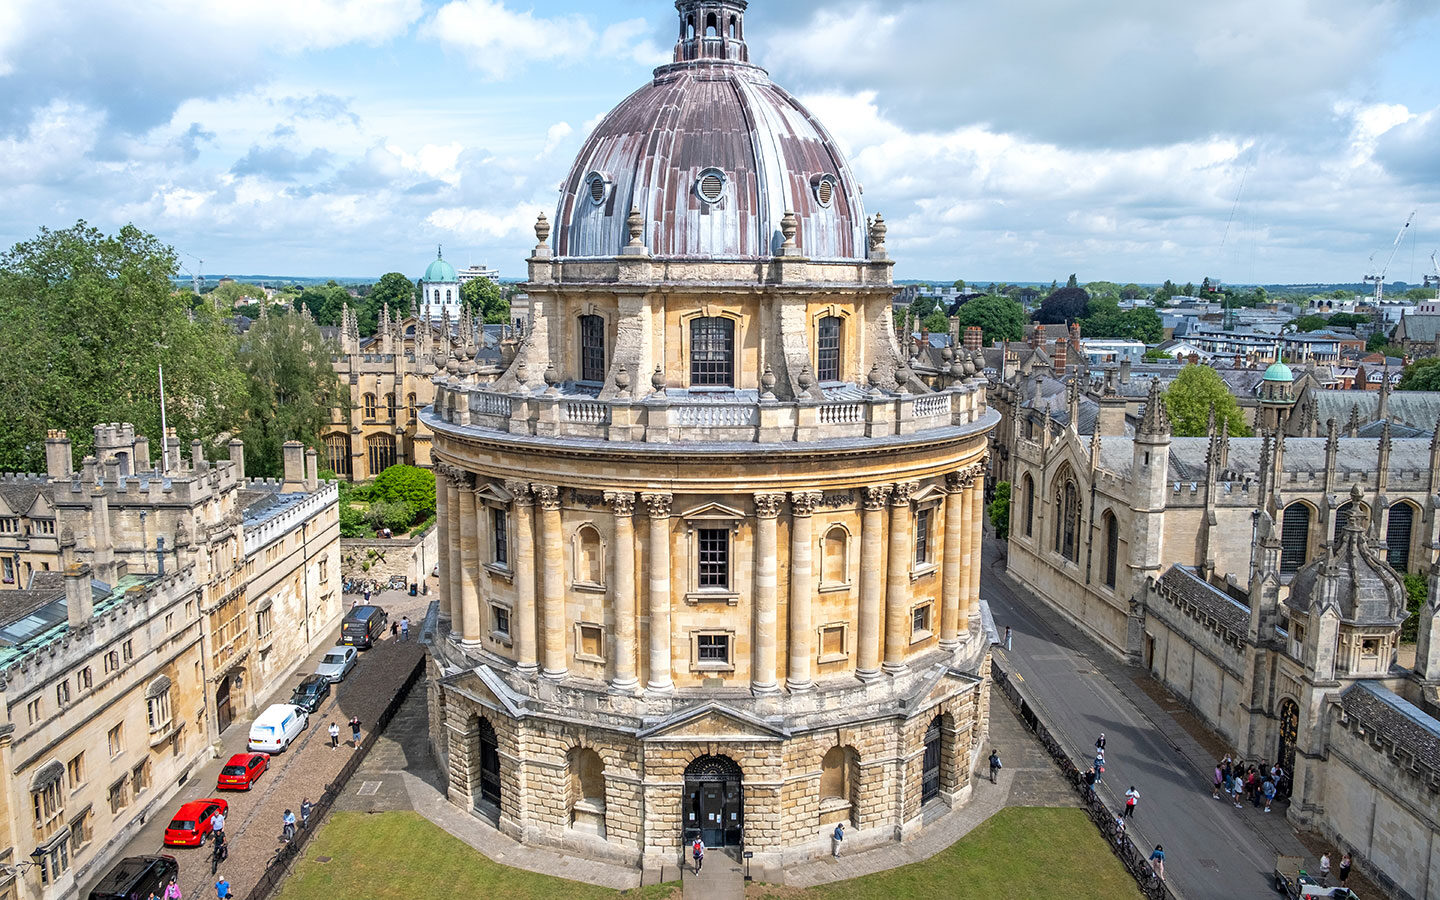 Views of Oxford University's Radcliffe Camera from the tower of the University Church of St Mary the Virgin